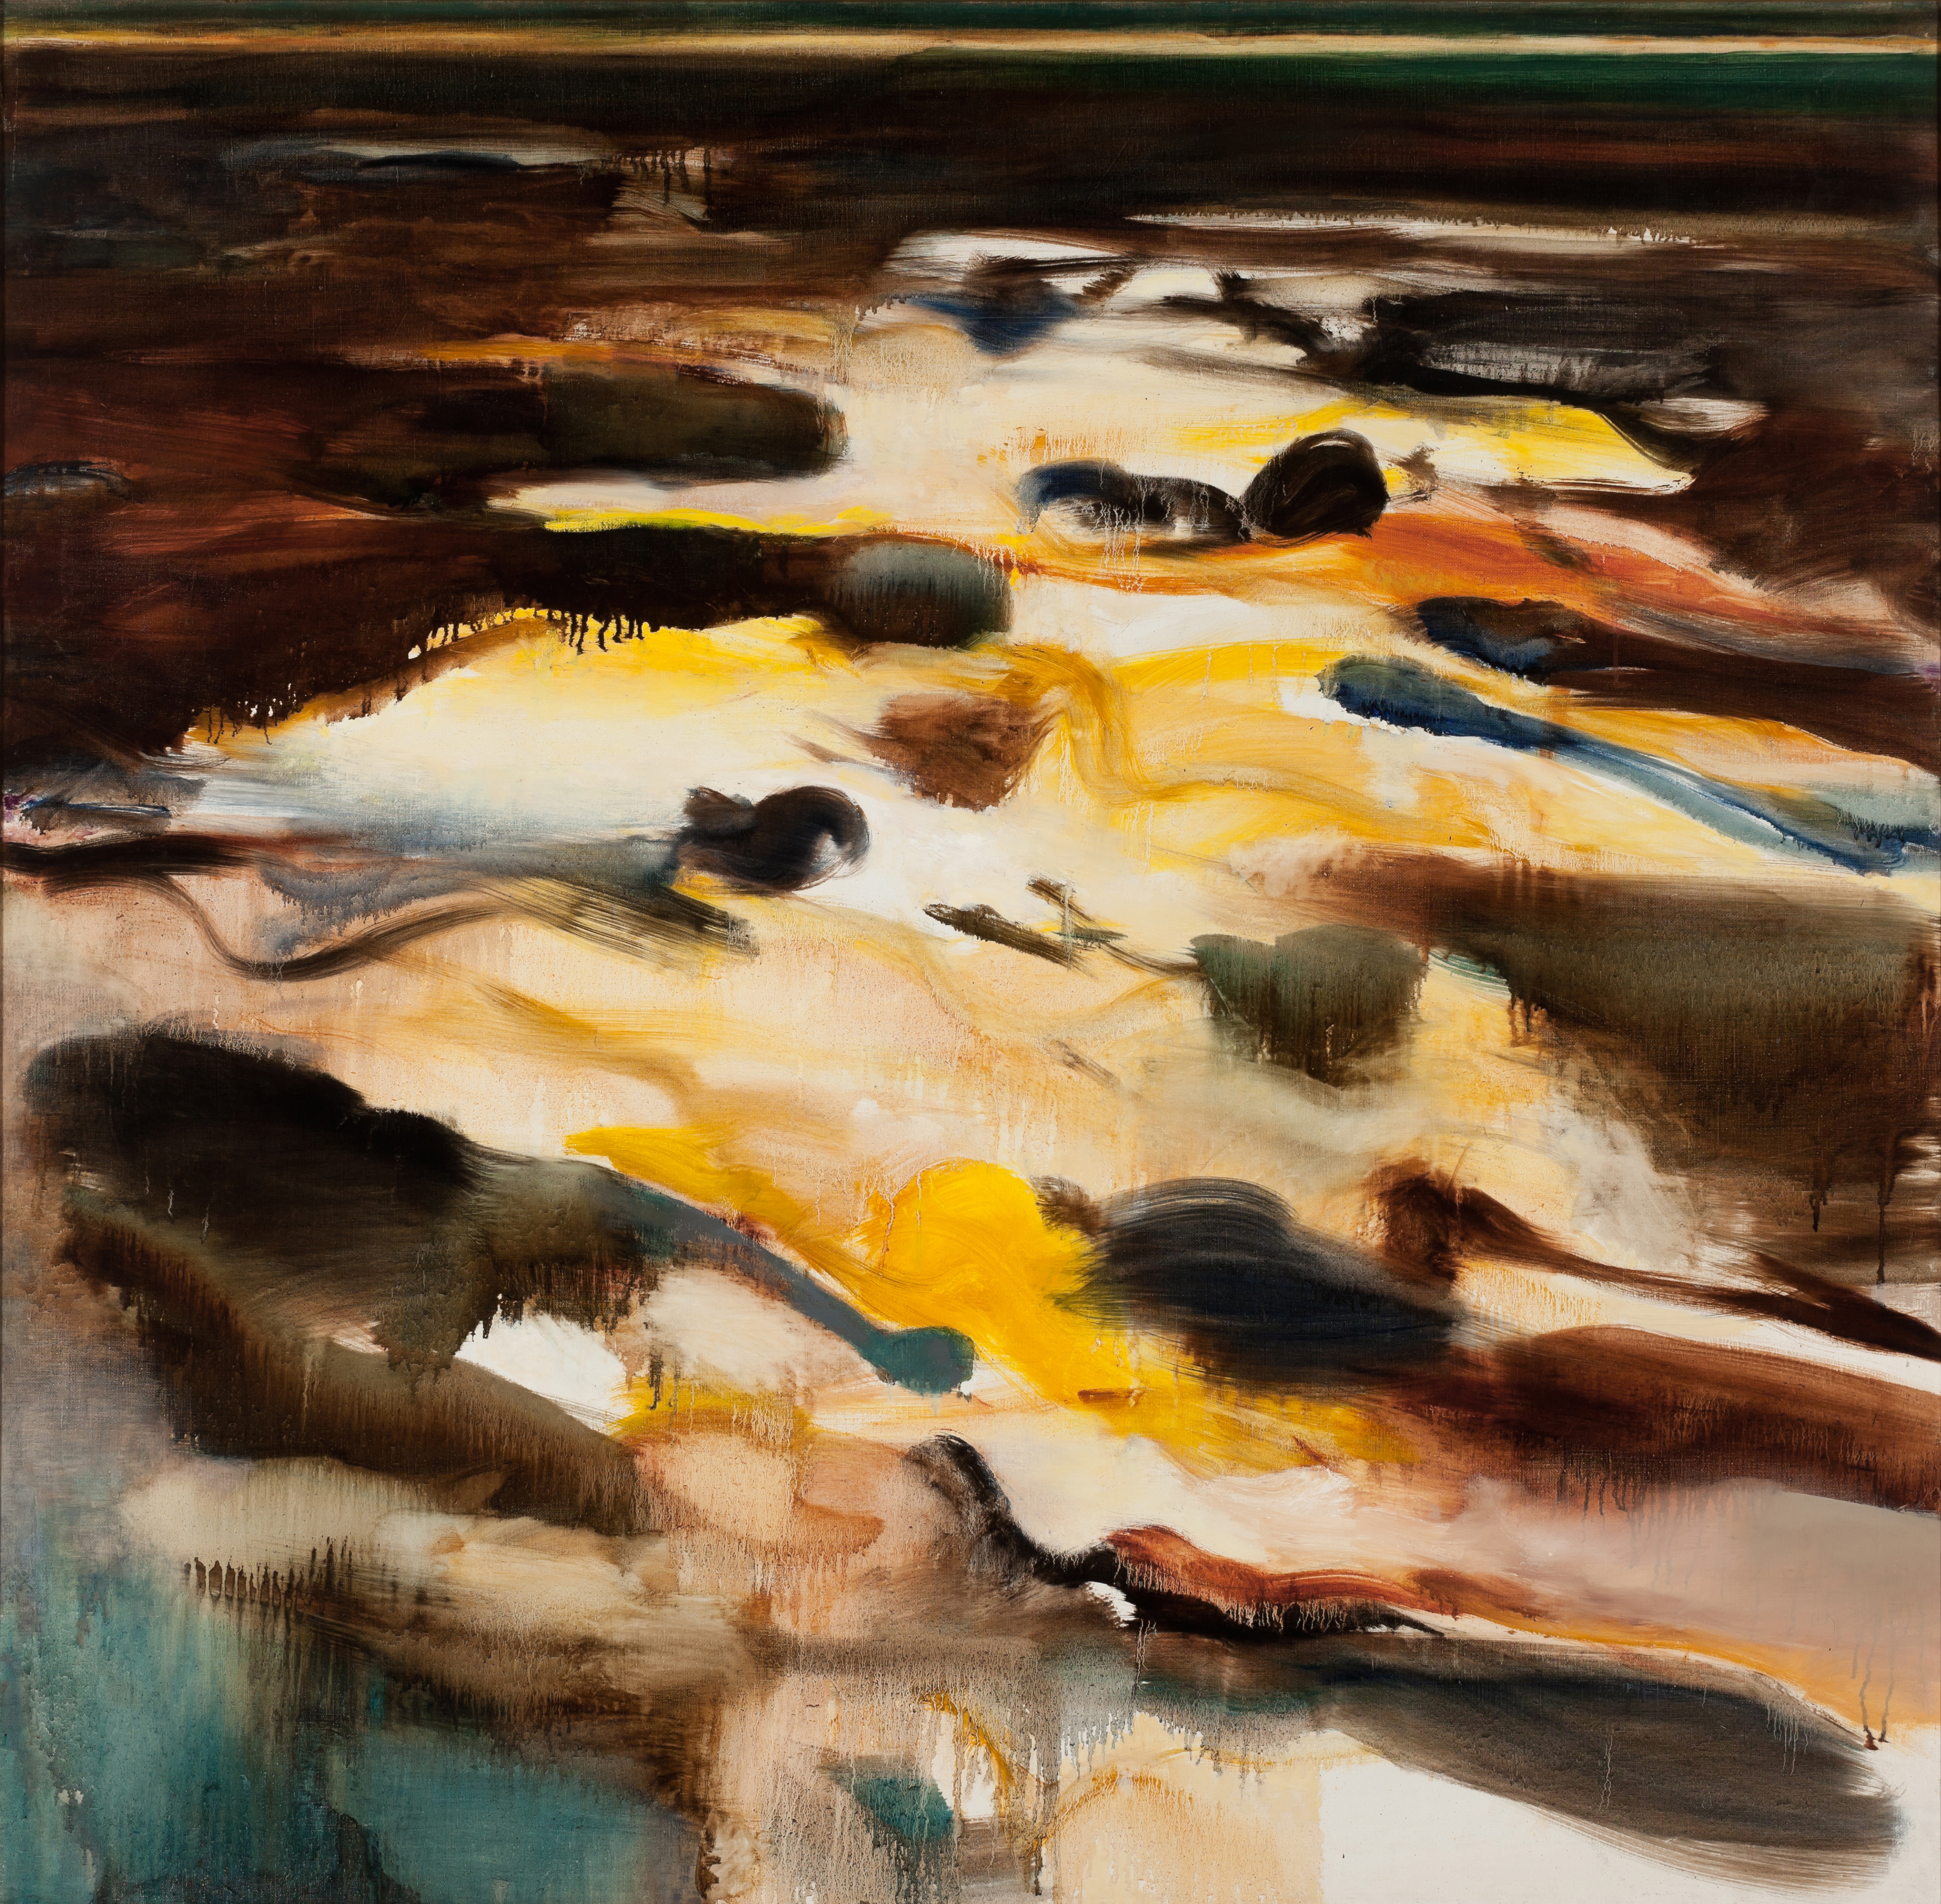 •	Barrie Cooke Night Lake Yellow 1979. Oil on canvas, 136 x 144 cm. Collection of the Arts Council/An Chomhairle Ealaíon